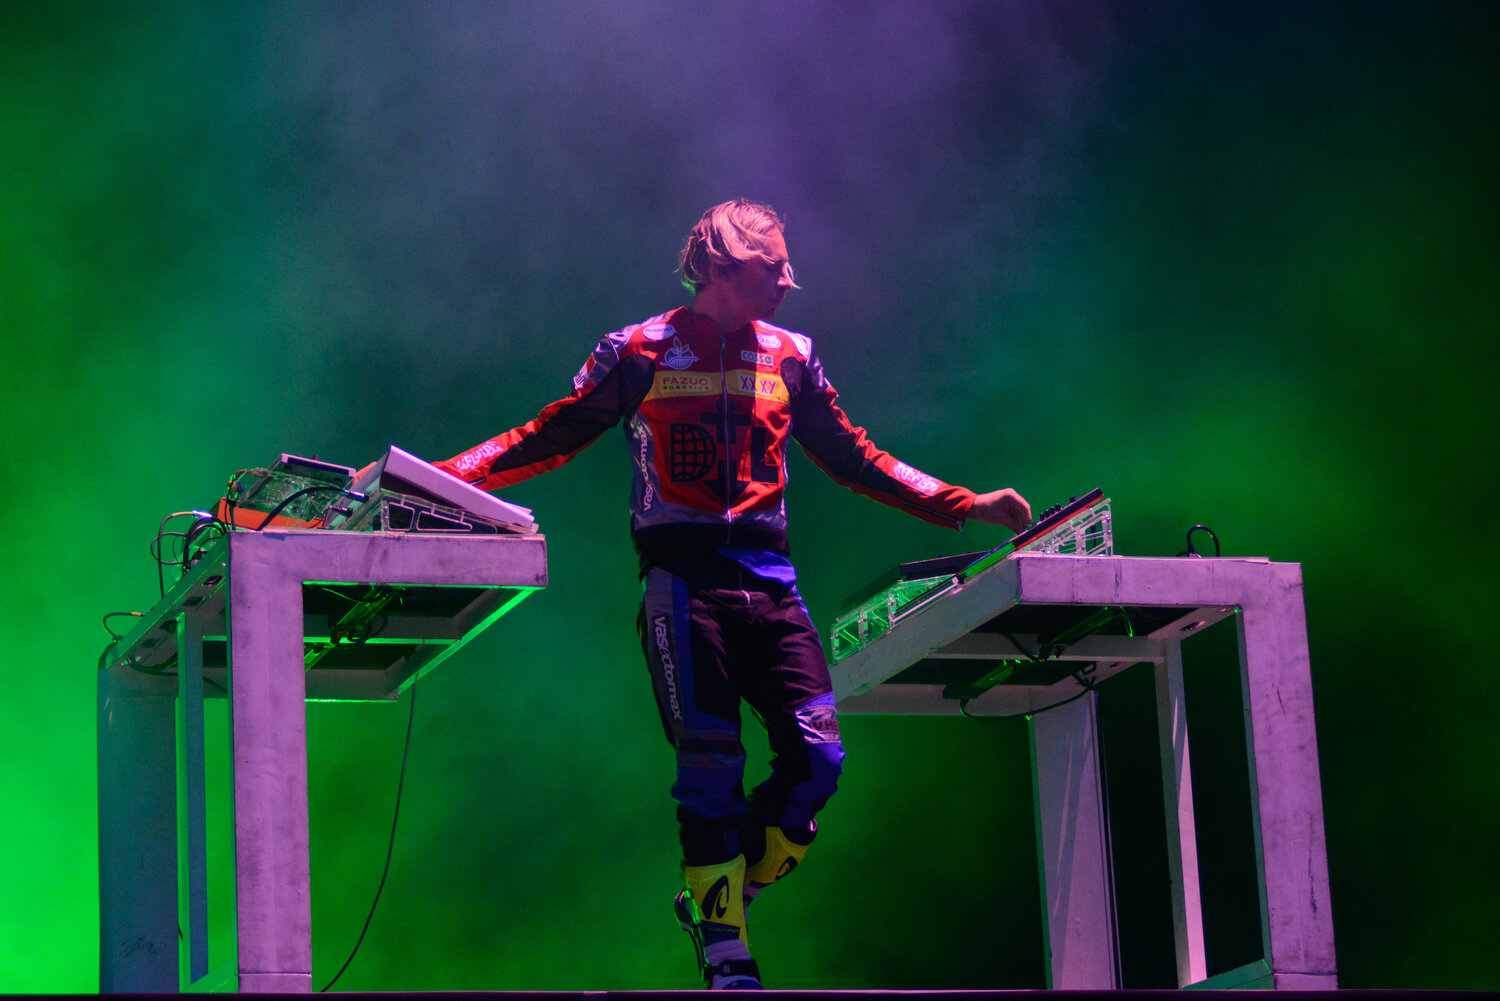 Australian musician and DJ Flume performs at the 2023 Hangout Music Festival.